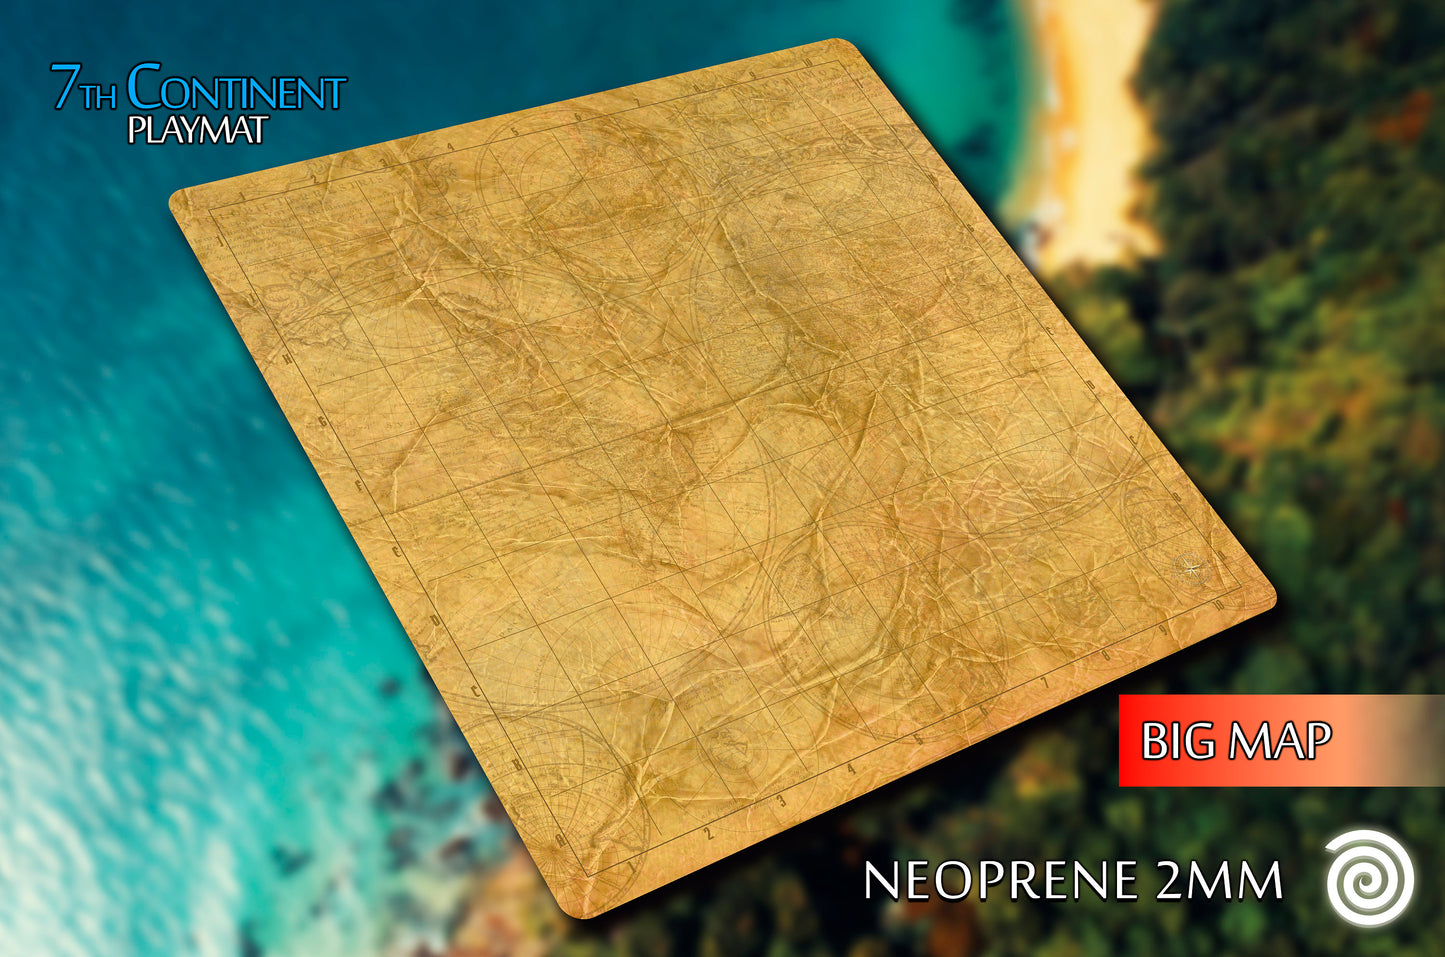 Playmat 7th Continent / 7th Citadel UNOFFICIAL PRODUCT